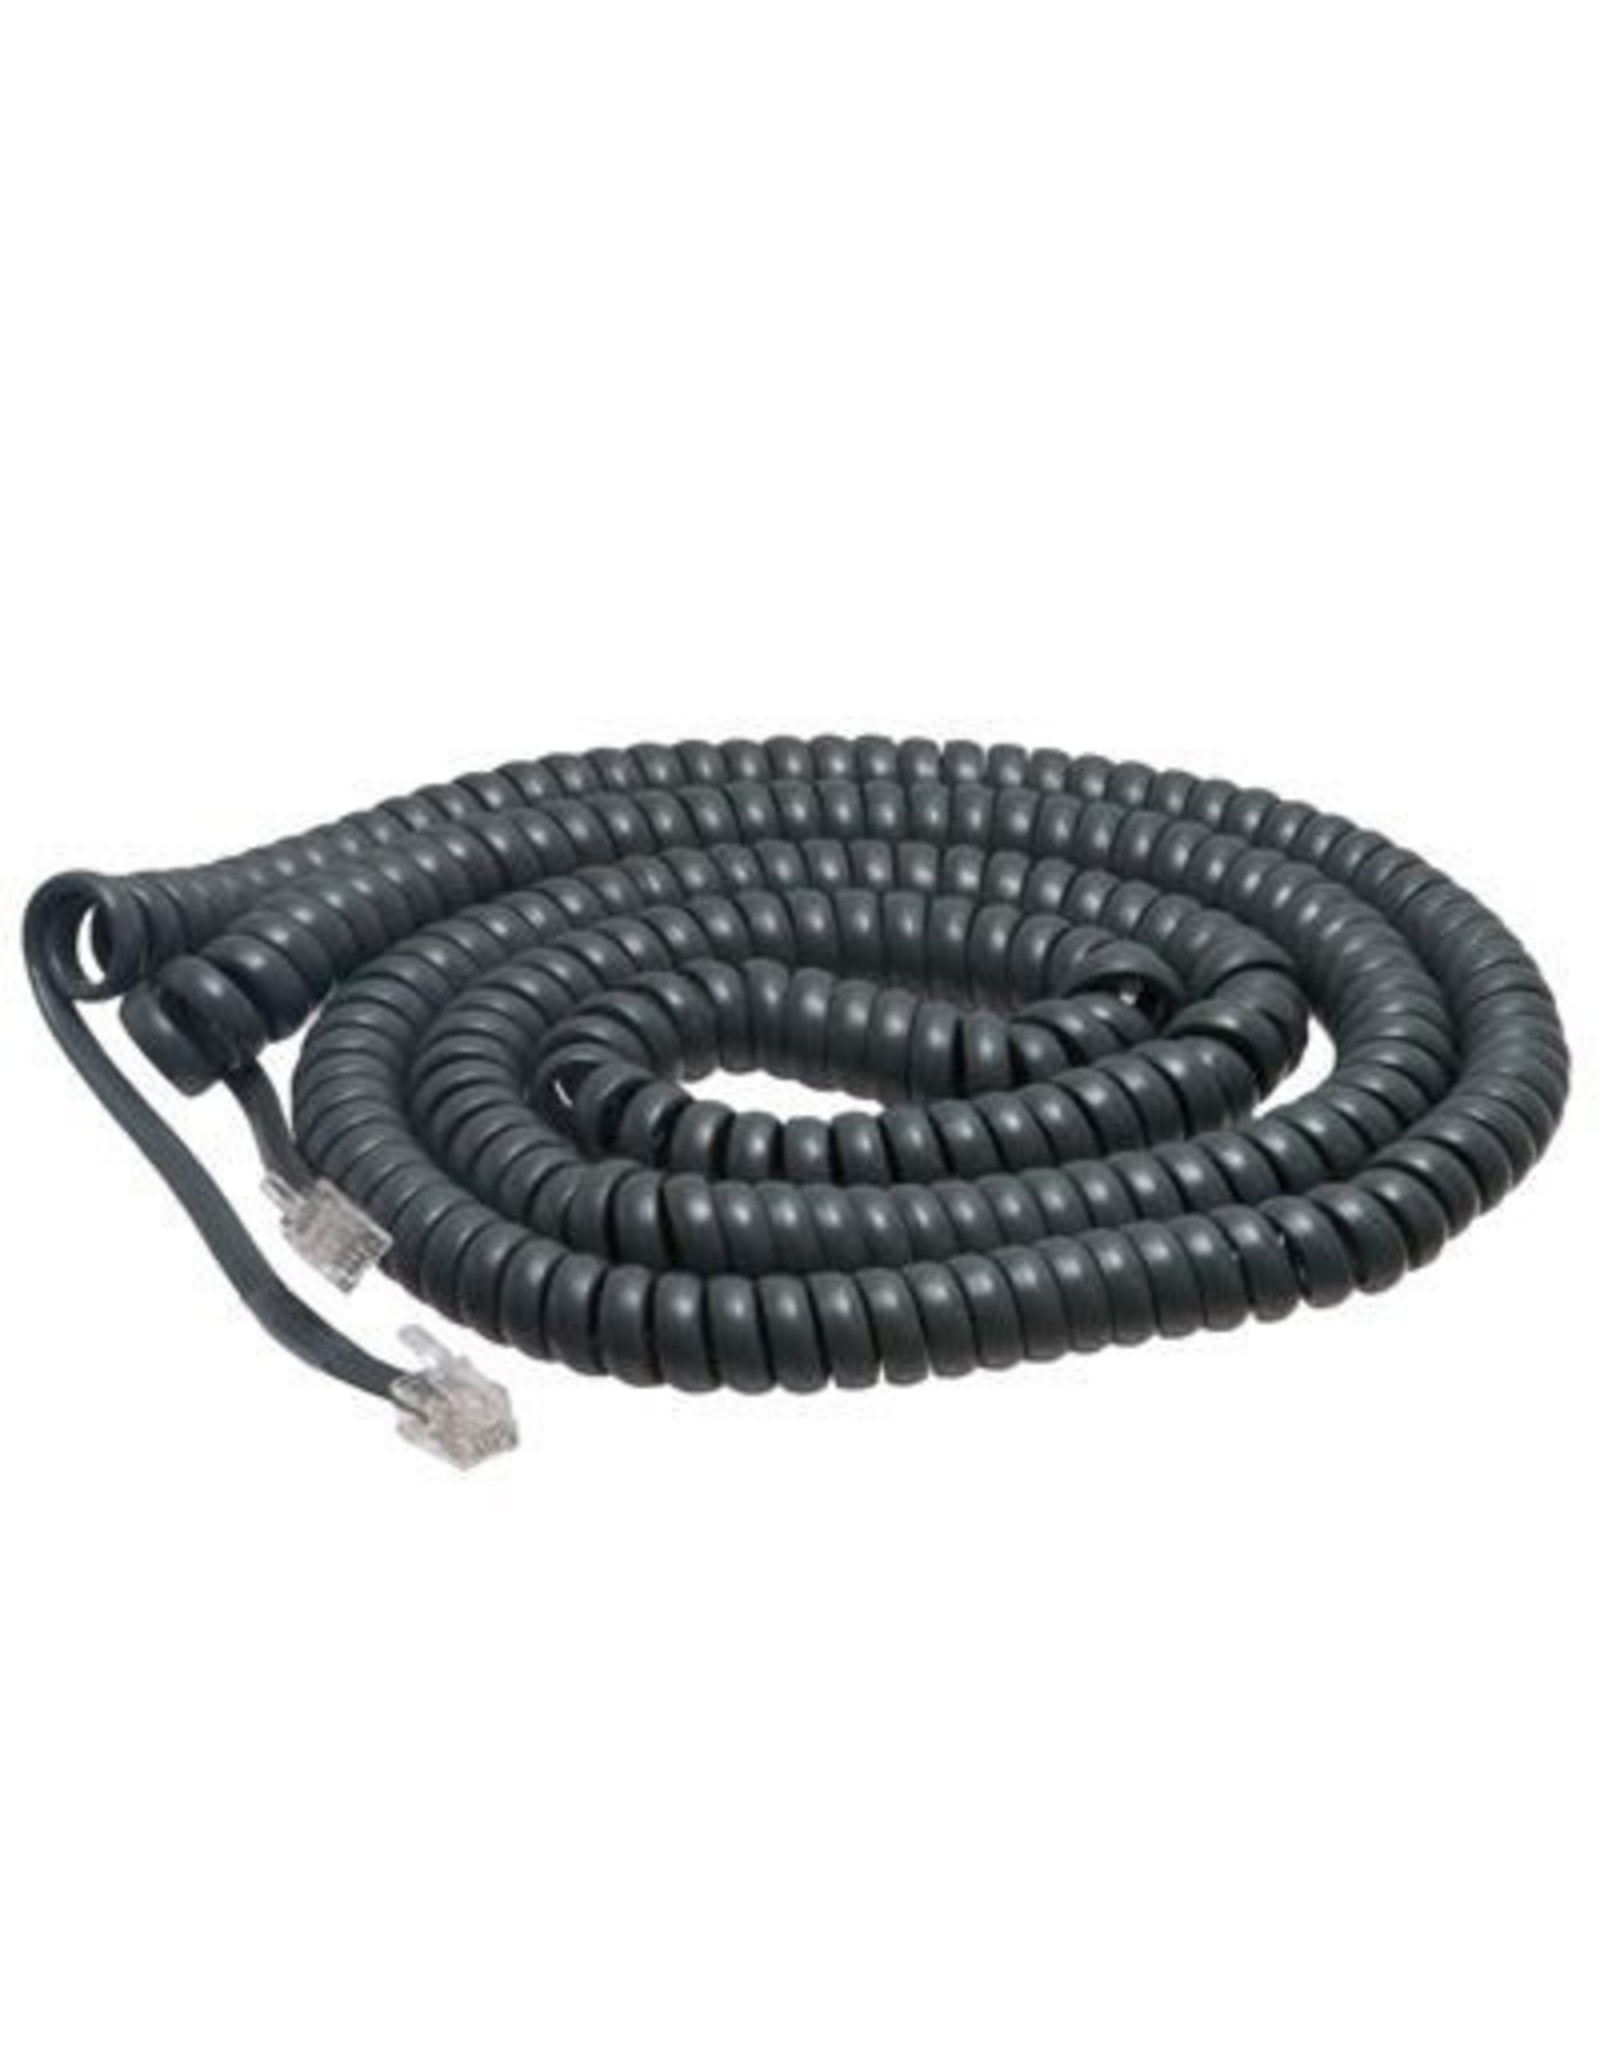 Cisco Inst. Cisco Handset Replacement Cable 25 ft